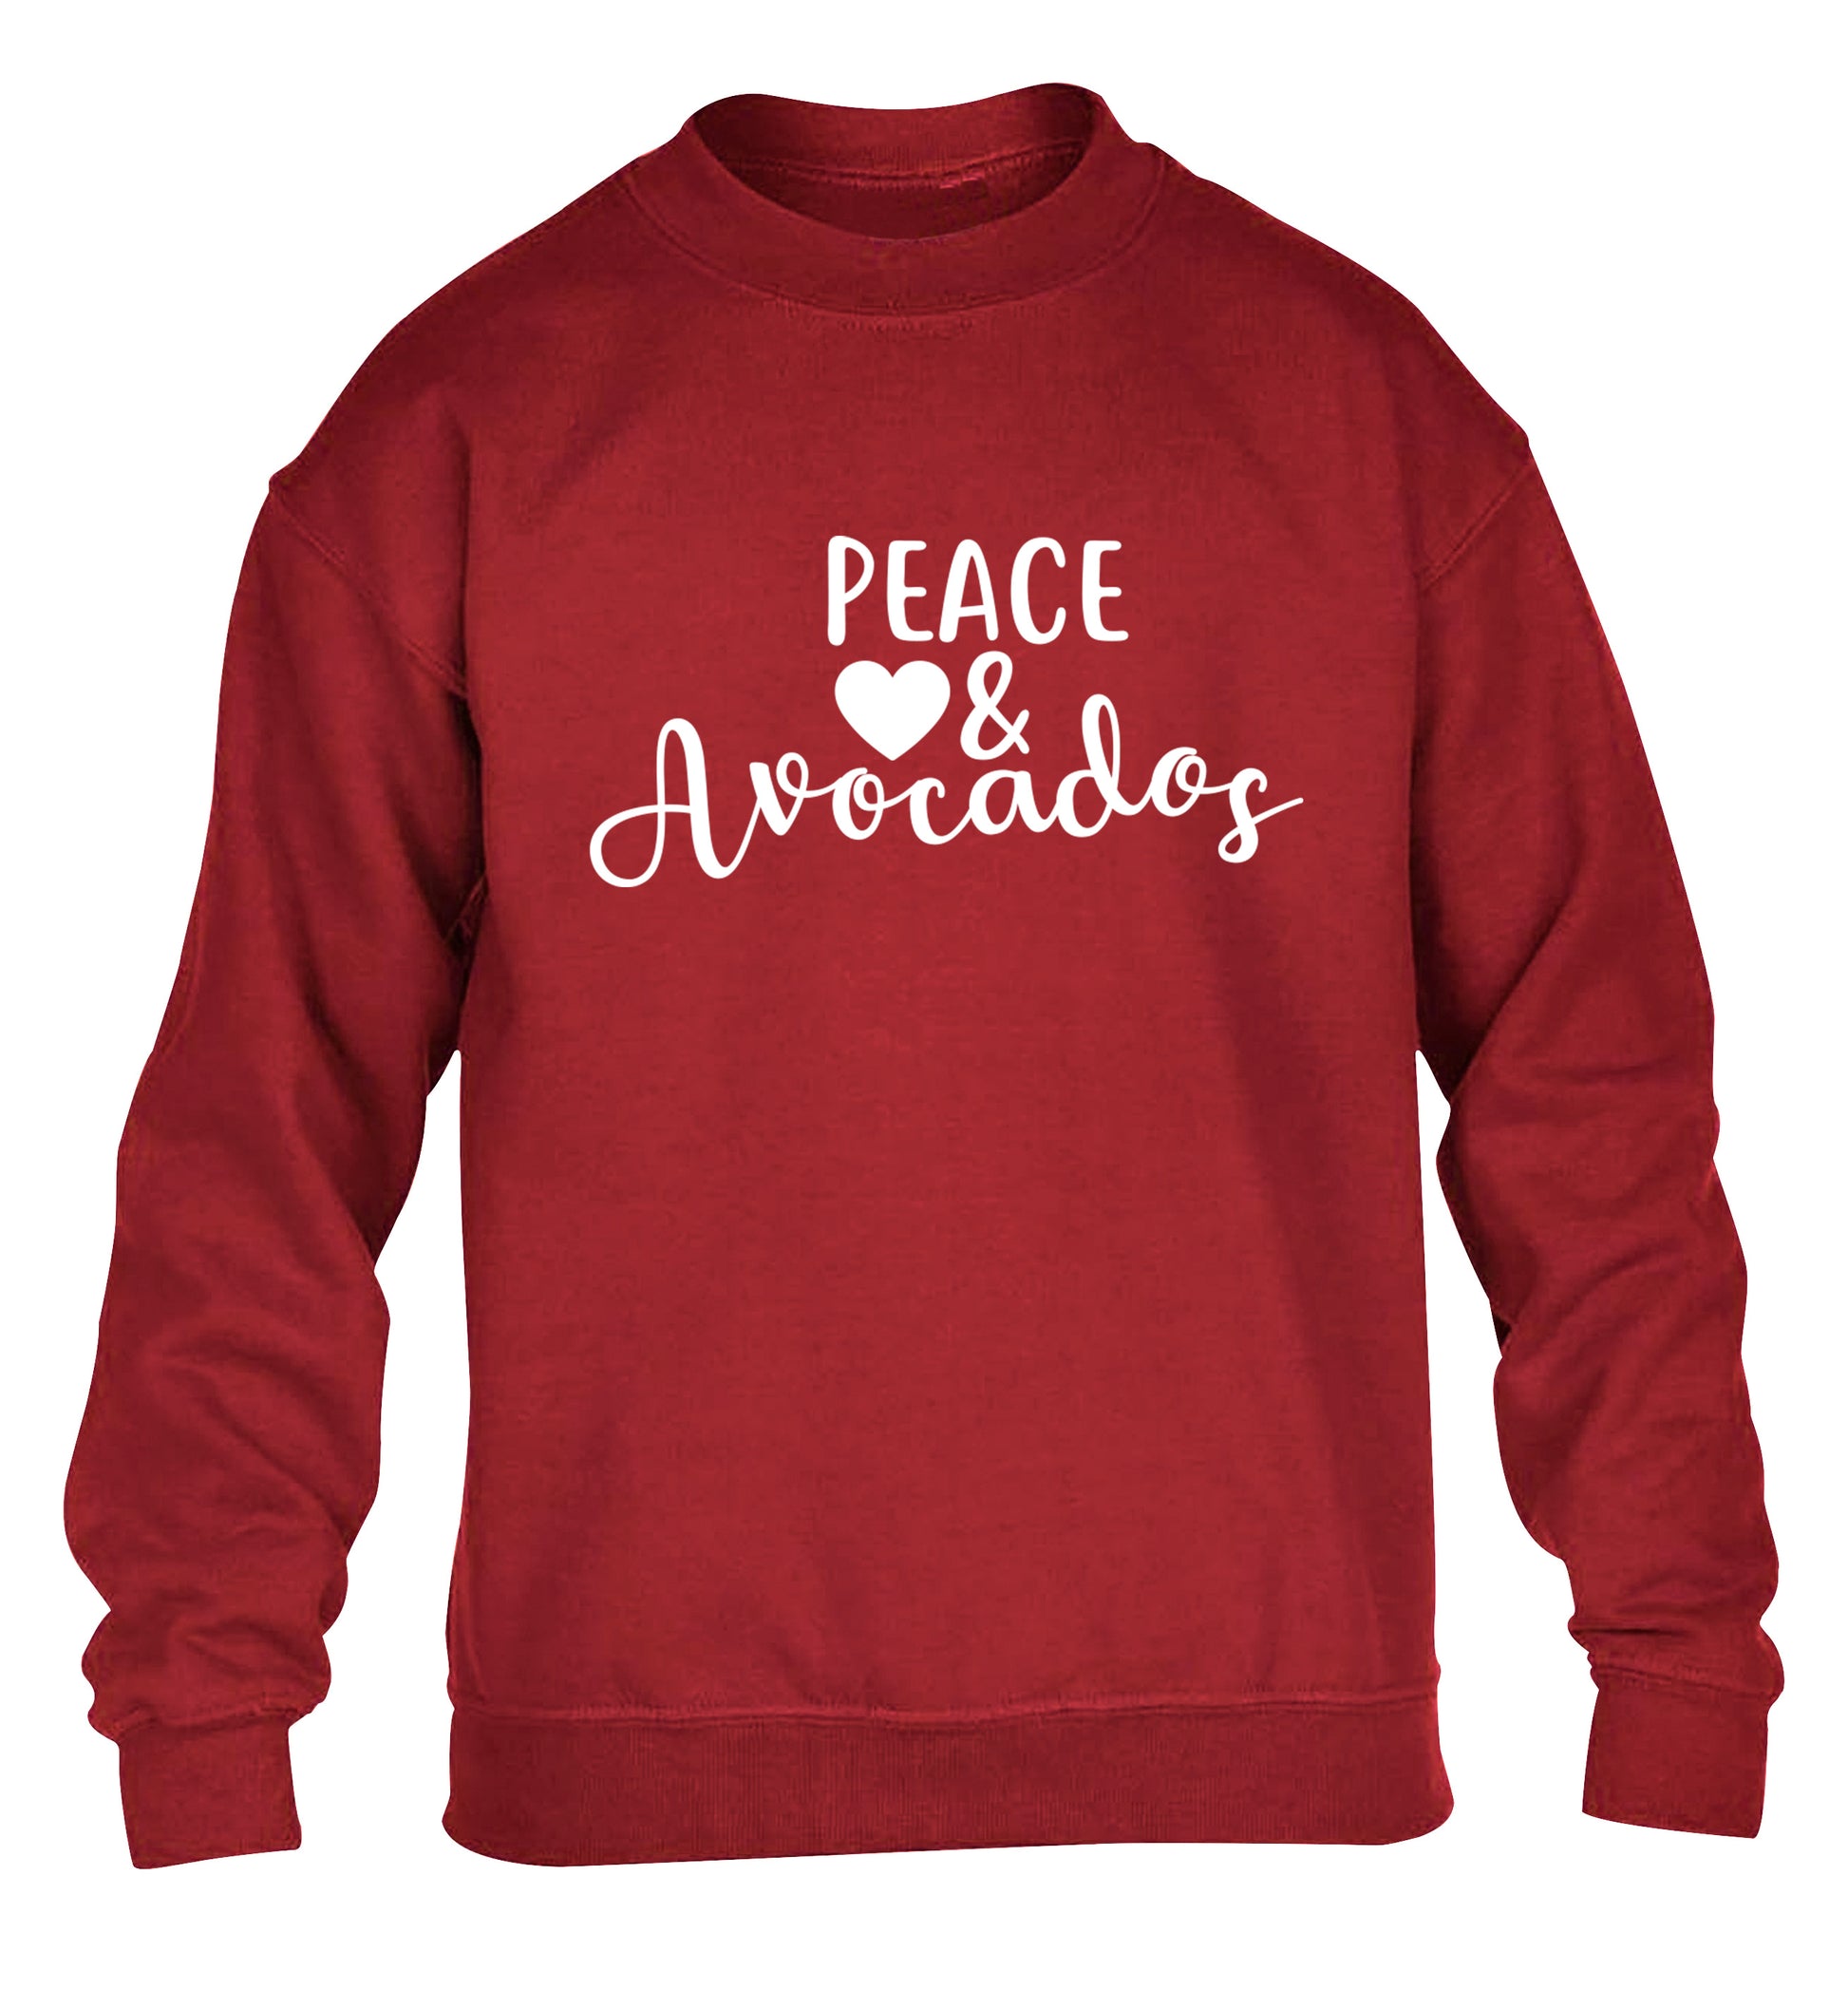 Peace love and avocados children's grey sweater 12-14 Years